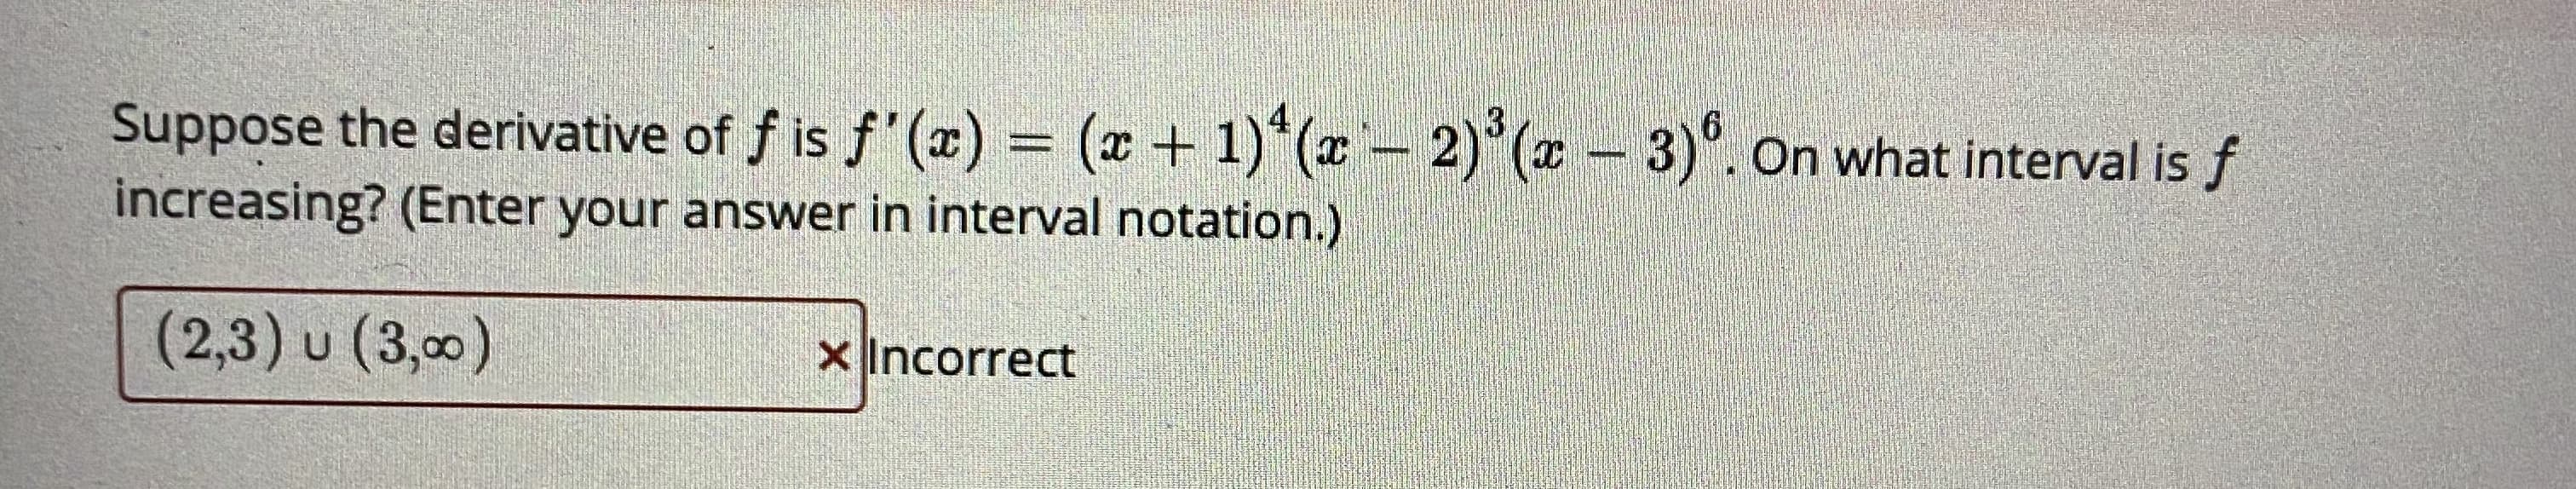 Suppose the derivative of f is f'(x) = (x + 1)*(x - 2)*(z- 3). On what interval is f
increasing? (Enter your answer in interval notation.)
(2,3) u (3,00)
X Incorrect
